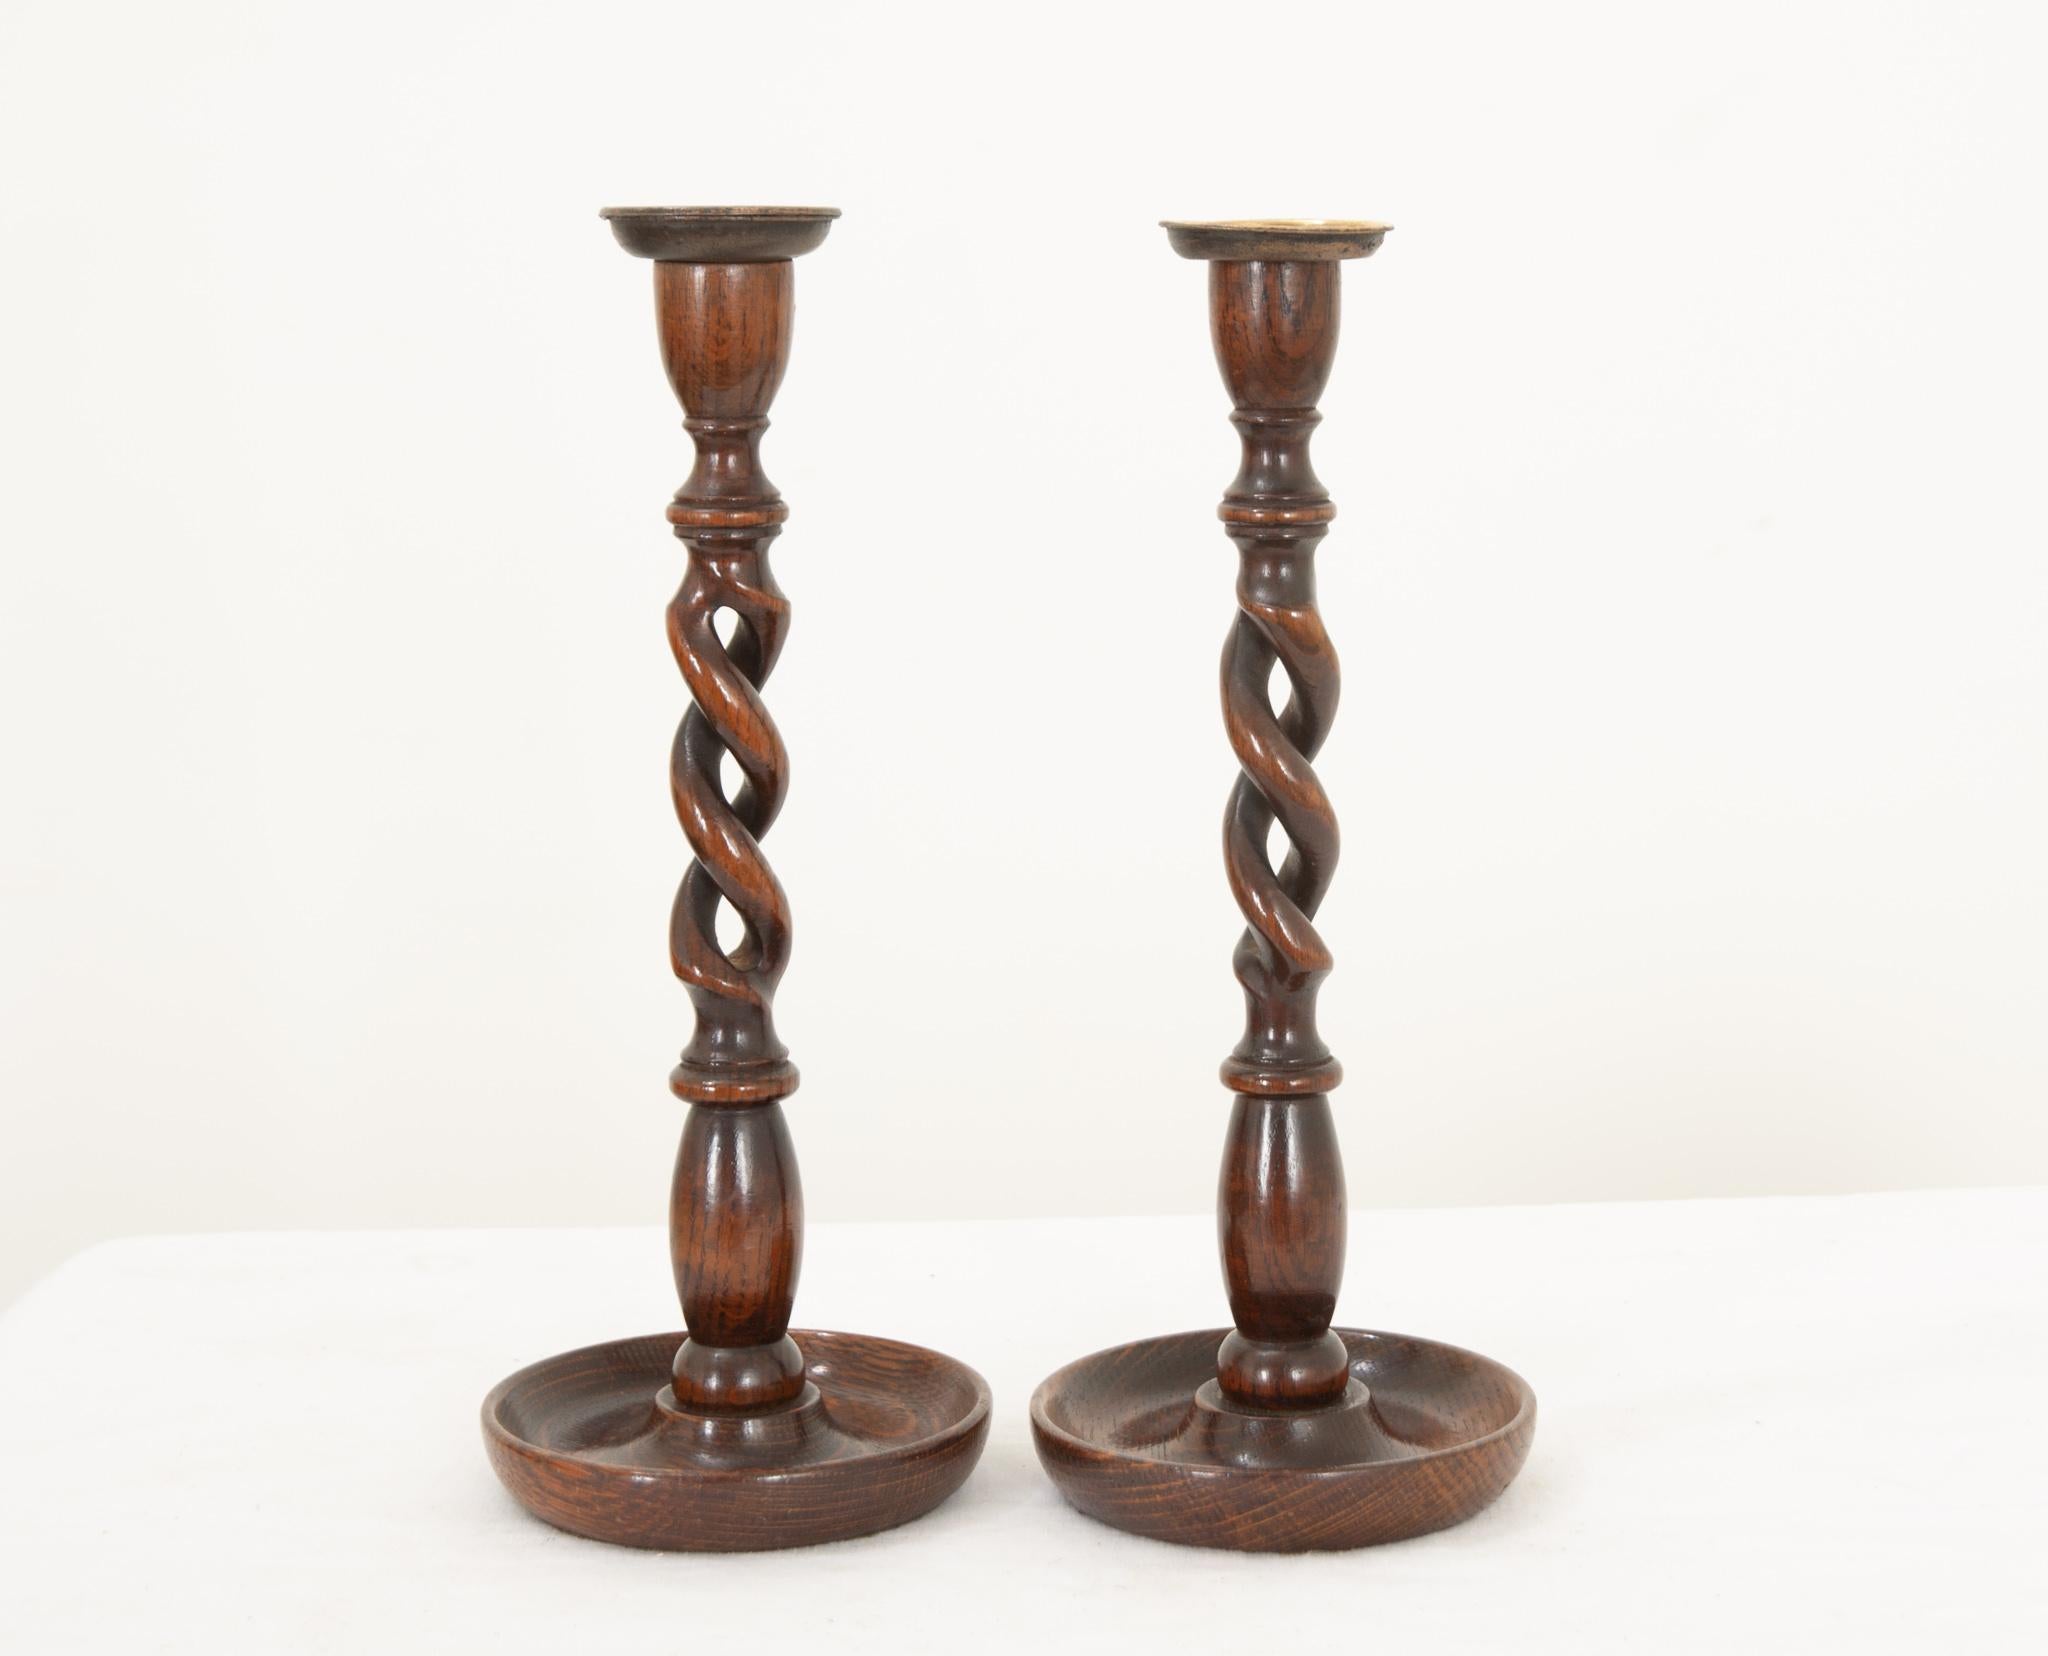 A lovely pair of oak open barley twist candlestick holders from England, hand crafted during the 1880’s. The richly toned hardwood has a fantastic patina and compliments the stamped brass bobeche perfectly. A worn felt bottom prevents them from